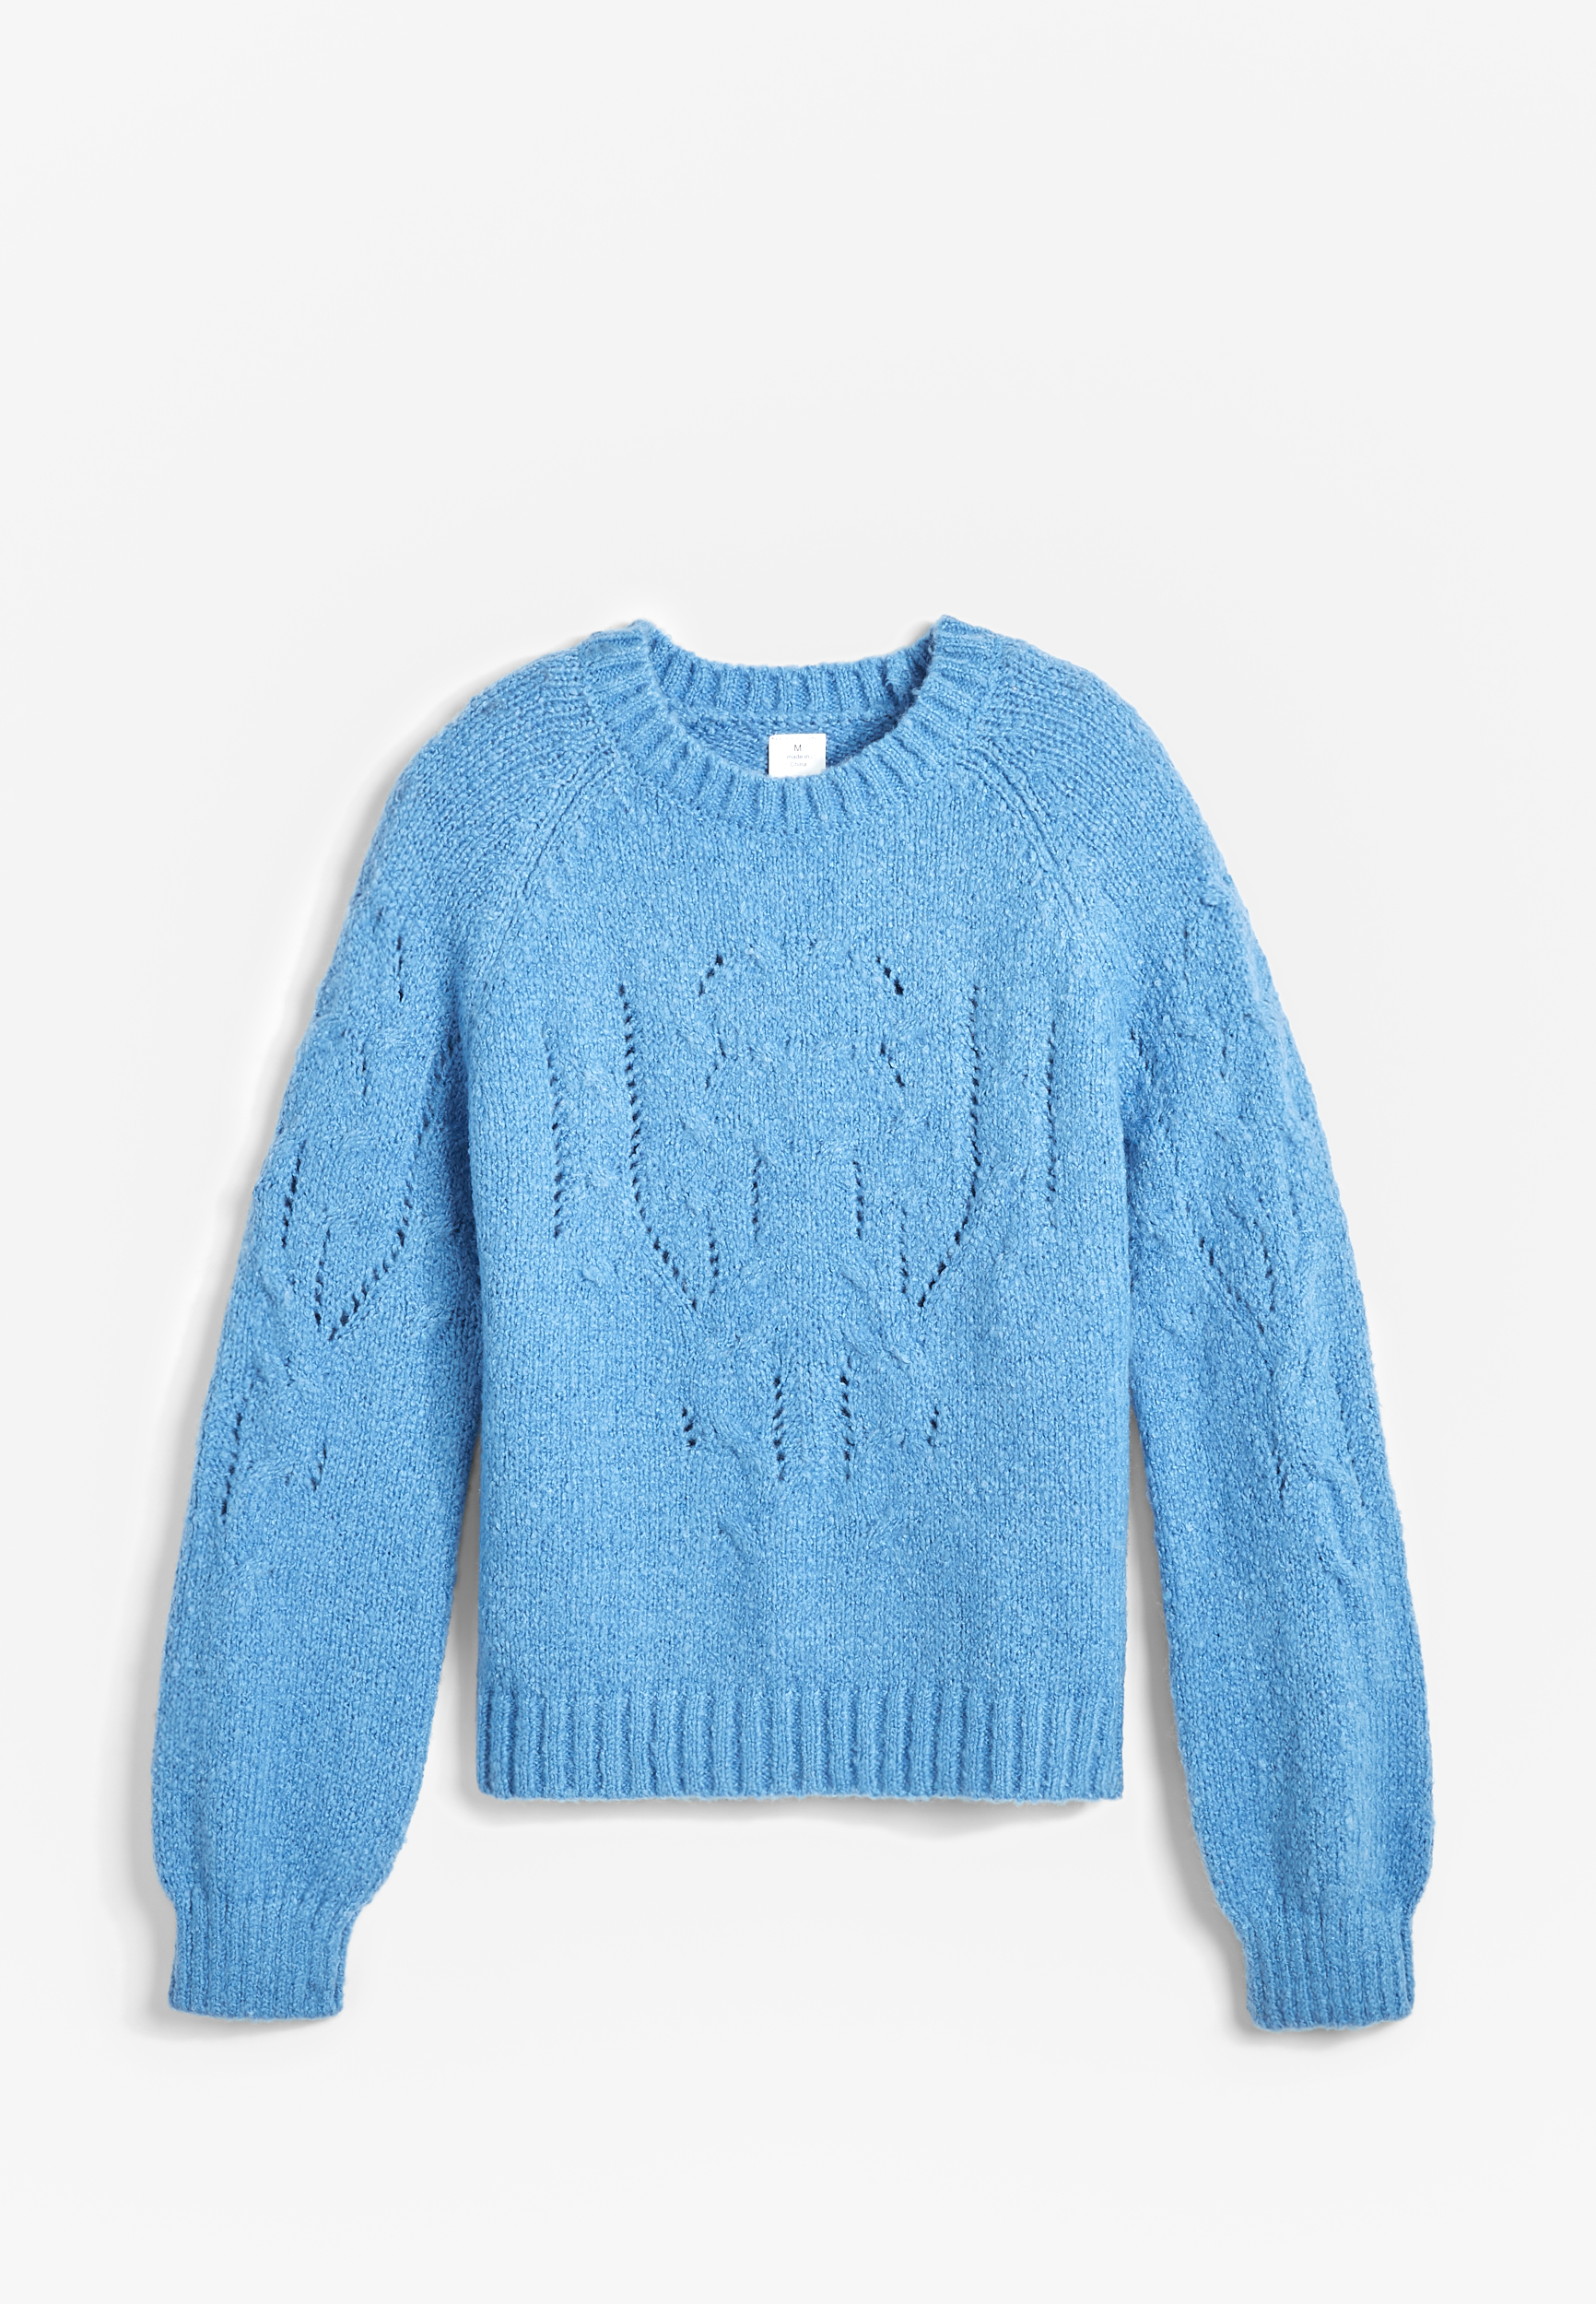 Girls Cable Knit Sweater | maurices